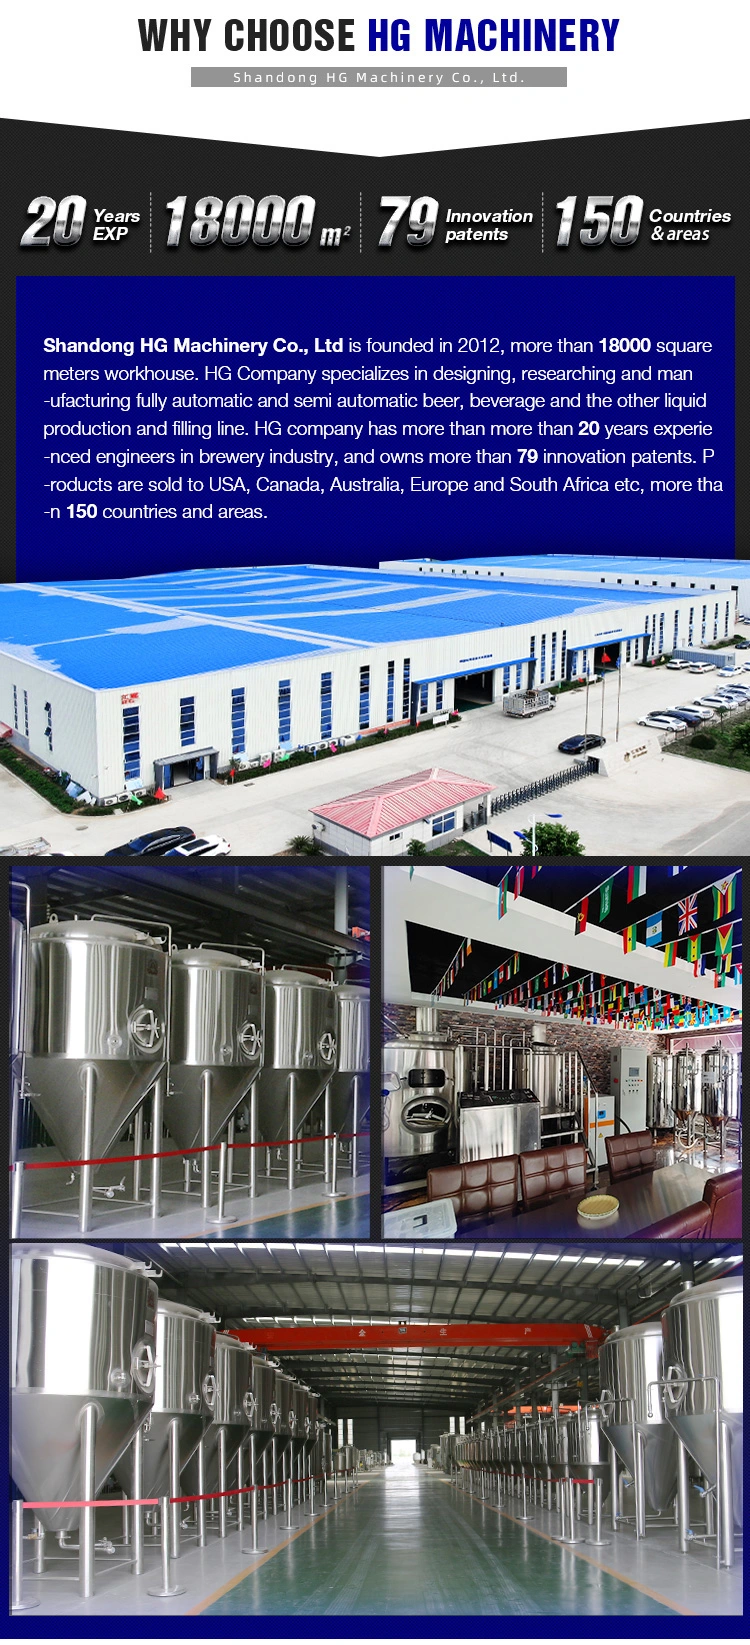 4000L Kvass Beverage Production Line Industrial Stainless Steel Beer Wine Fermentation Tank with Cooling Jacket